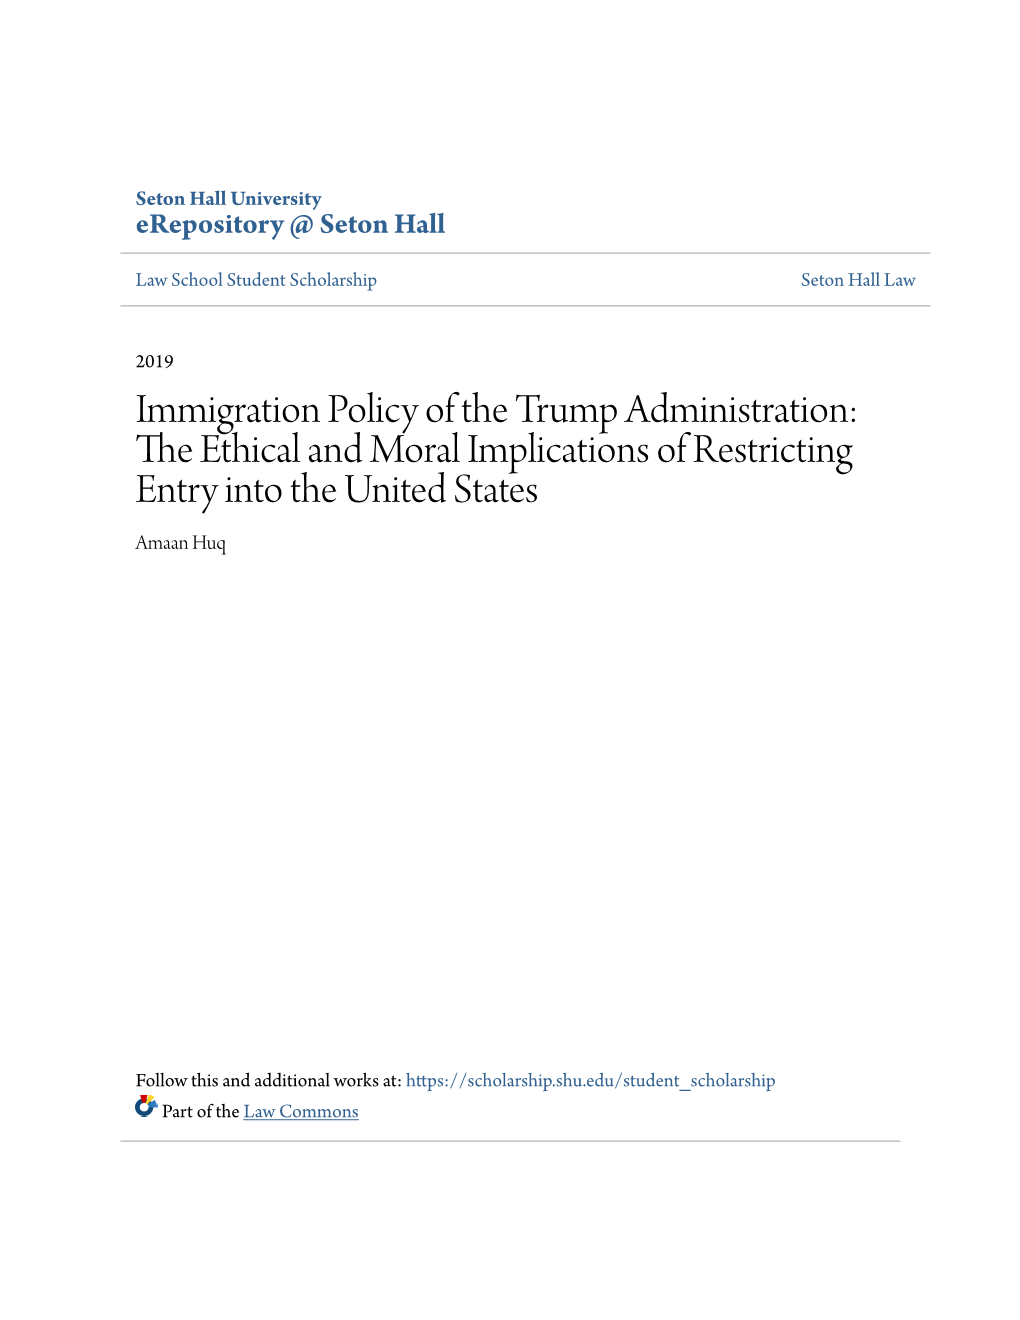 Immigration Policy of the Trump Administration: the Ethical And